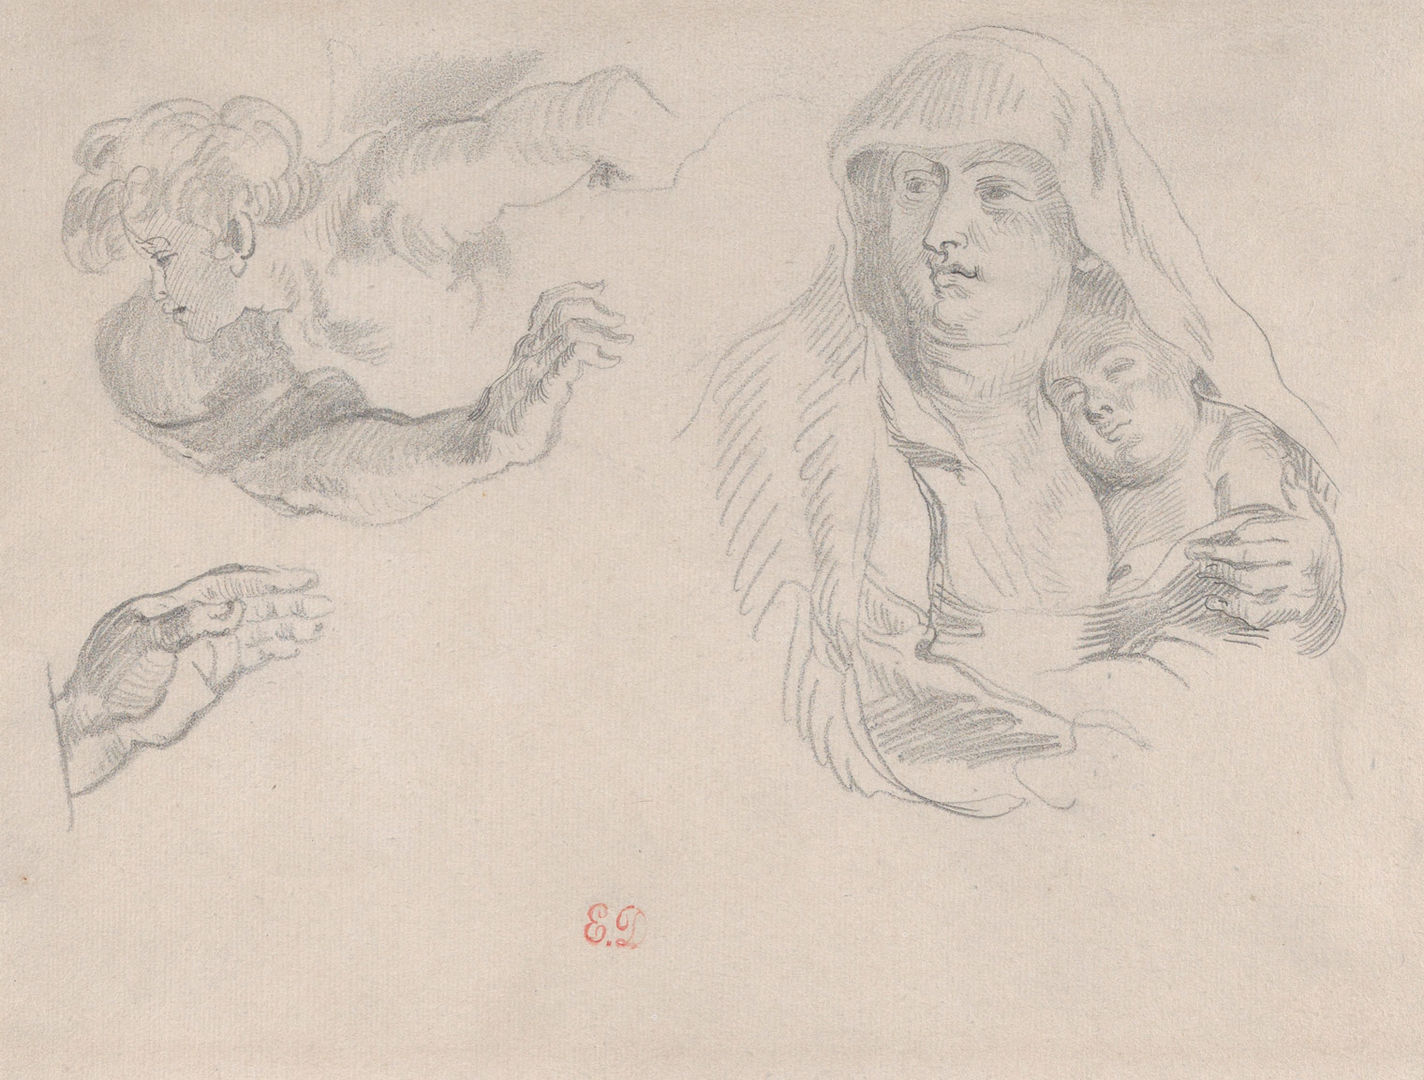 Delacroix sketches of a Rubens painting depicting the Flight into Egypt